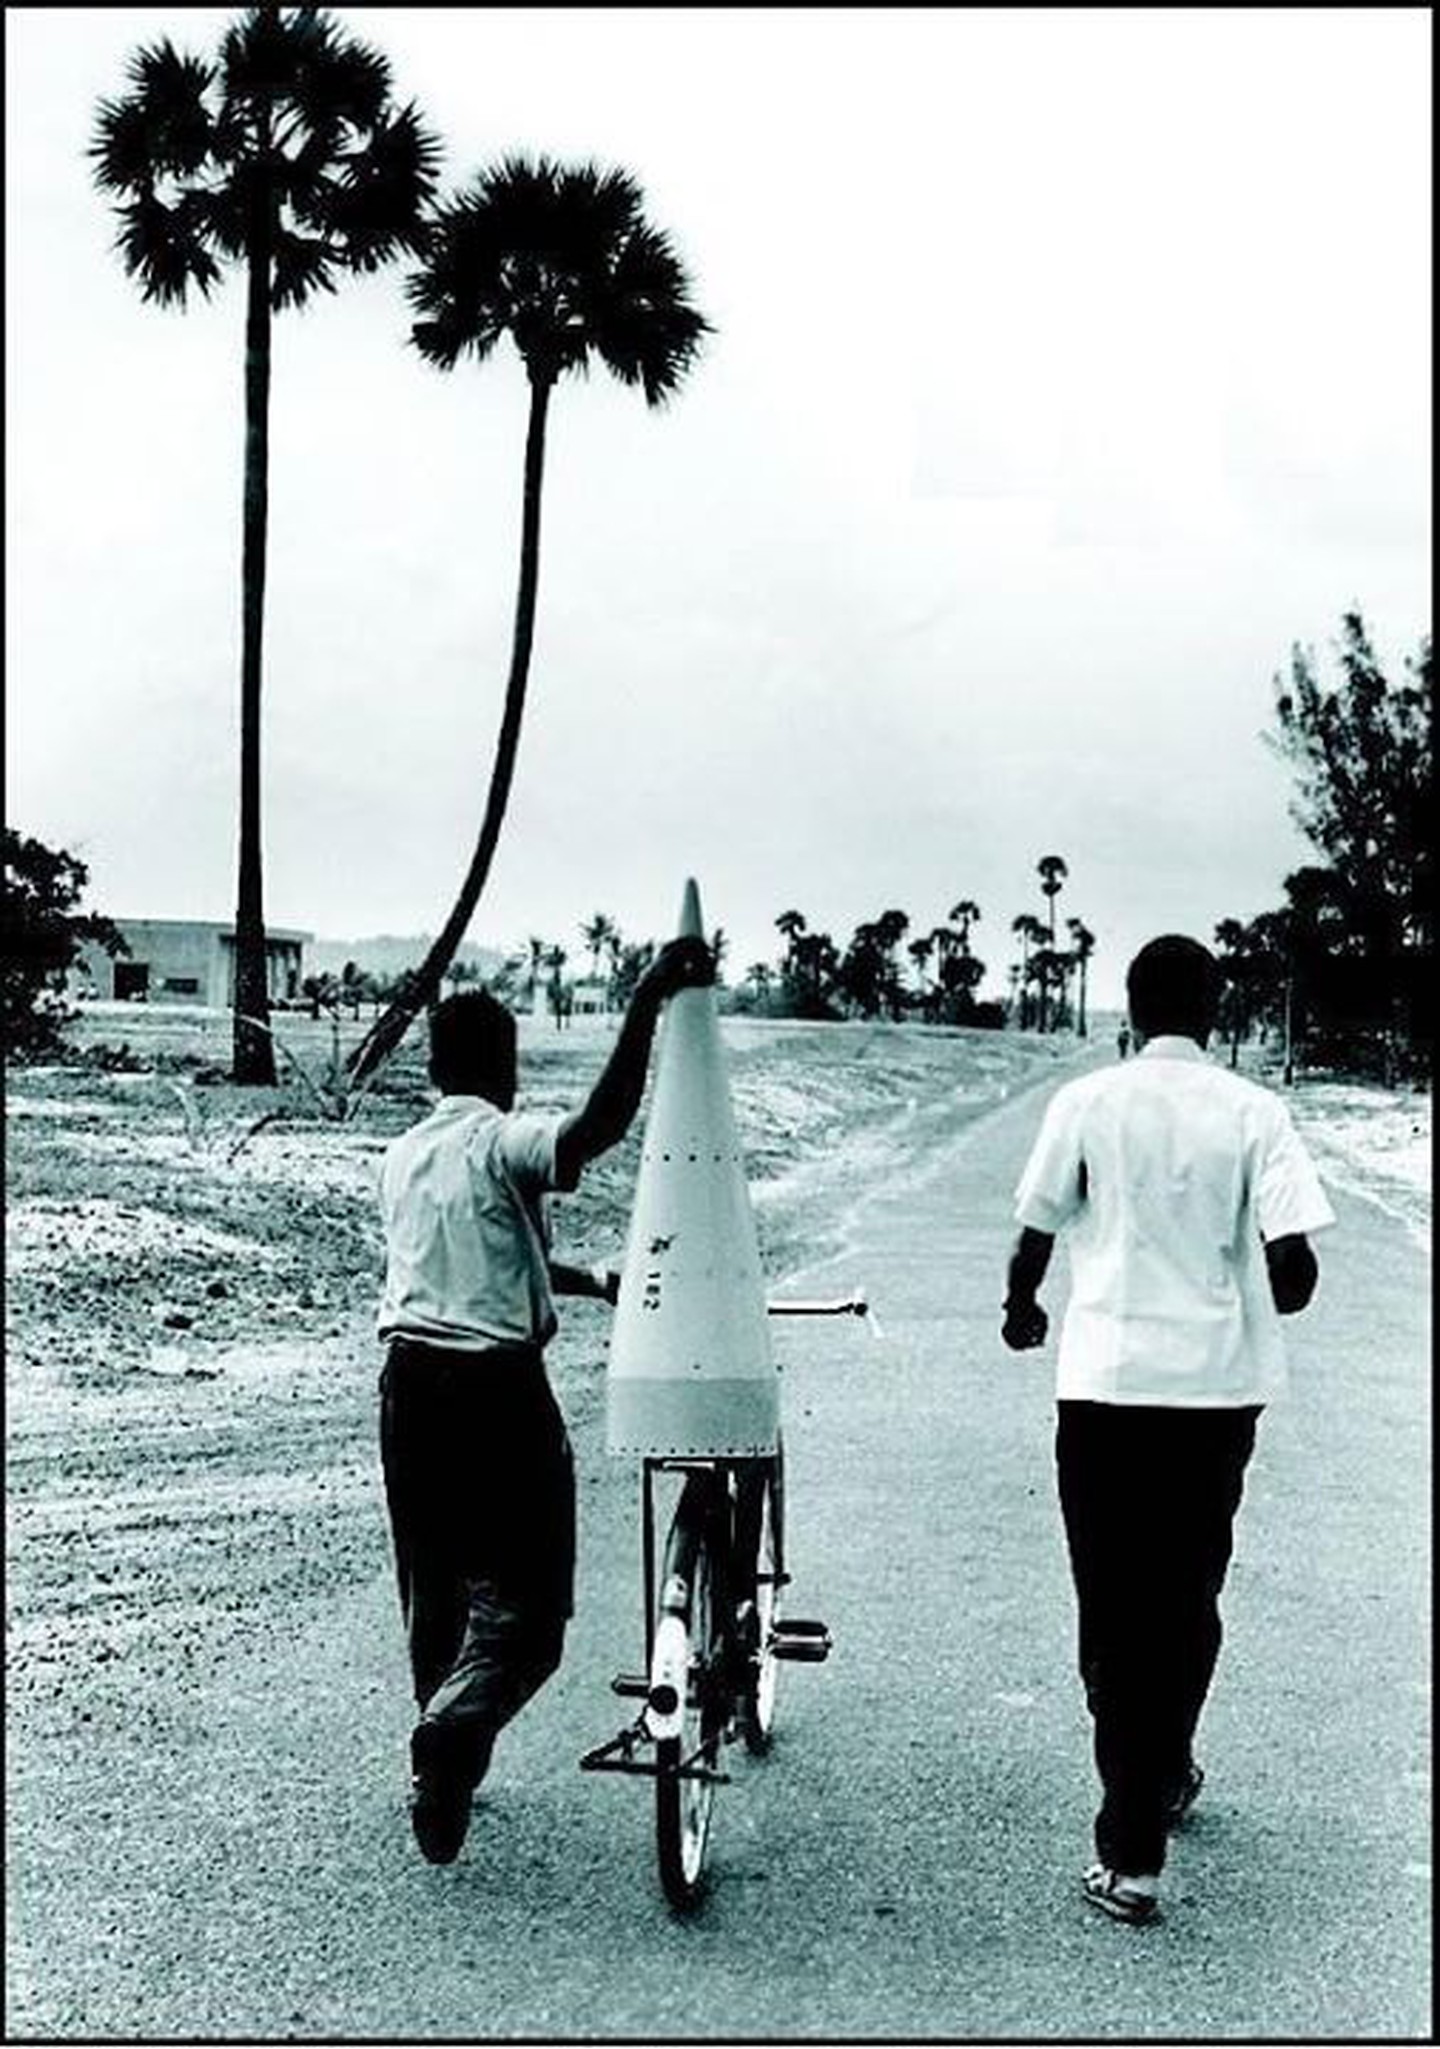 The first rocket launched in India